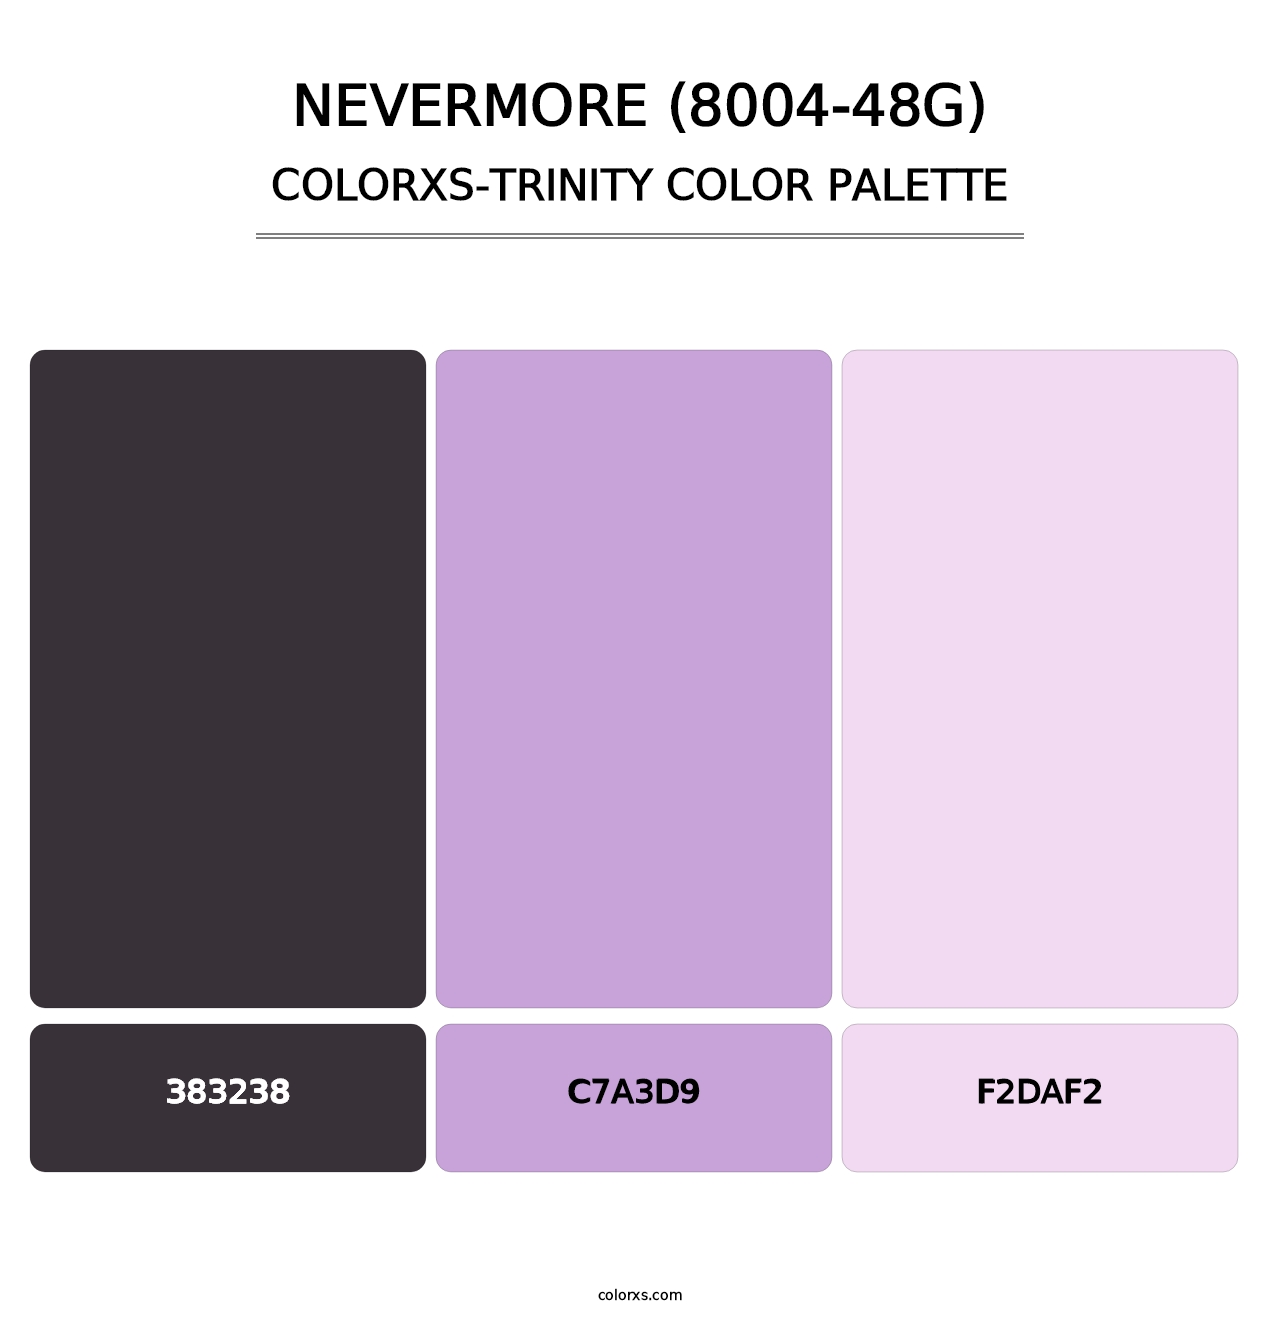 Nevermore (8004-48G) - Colorxs Trinity Palette